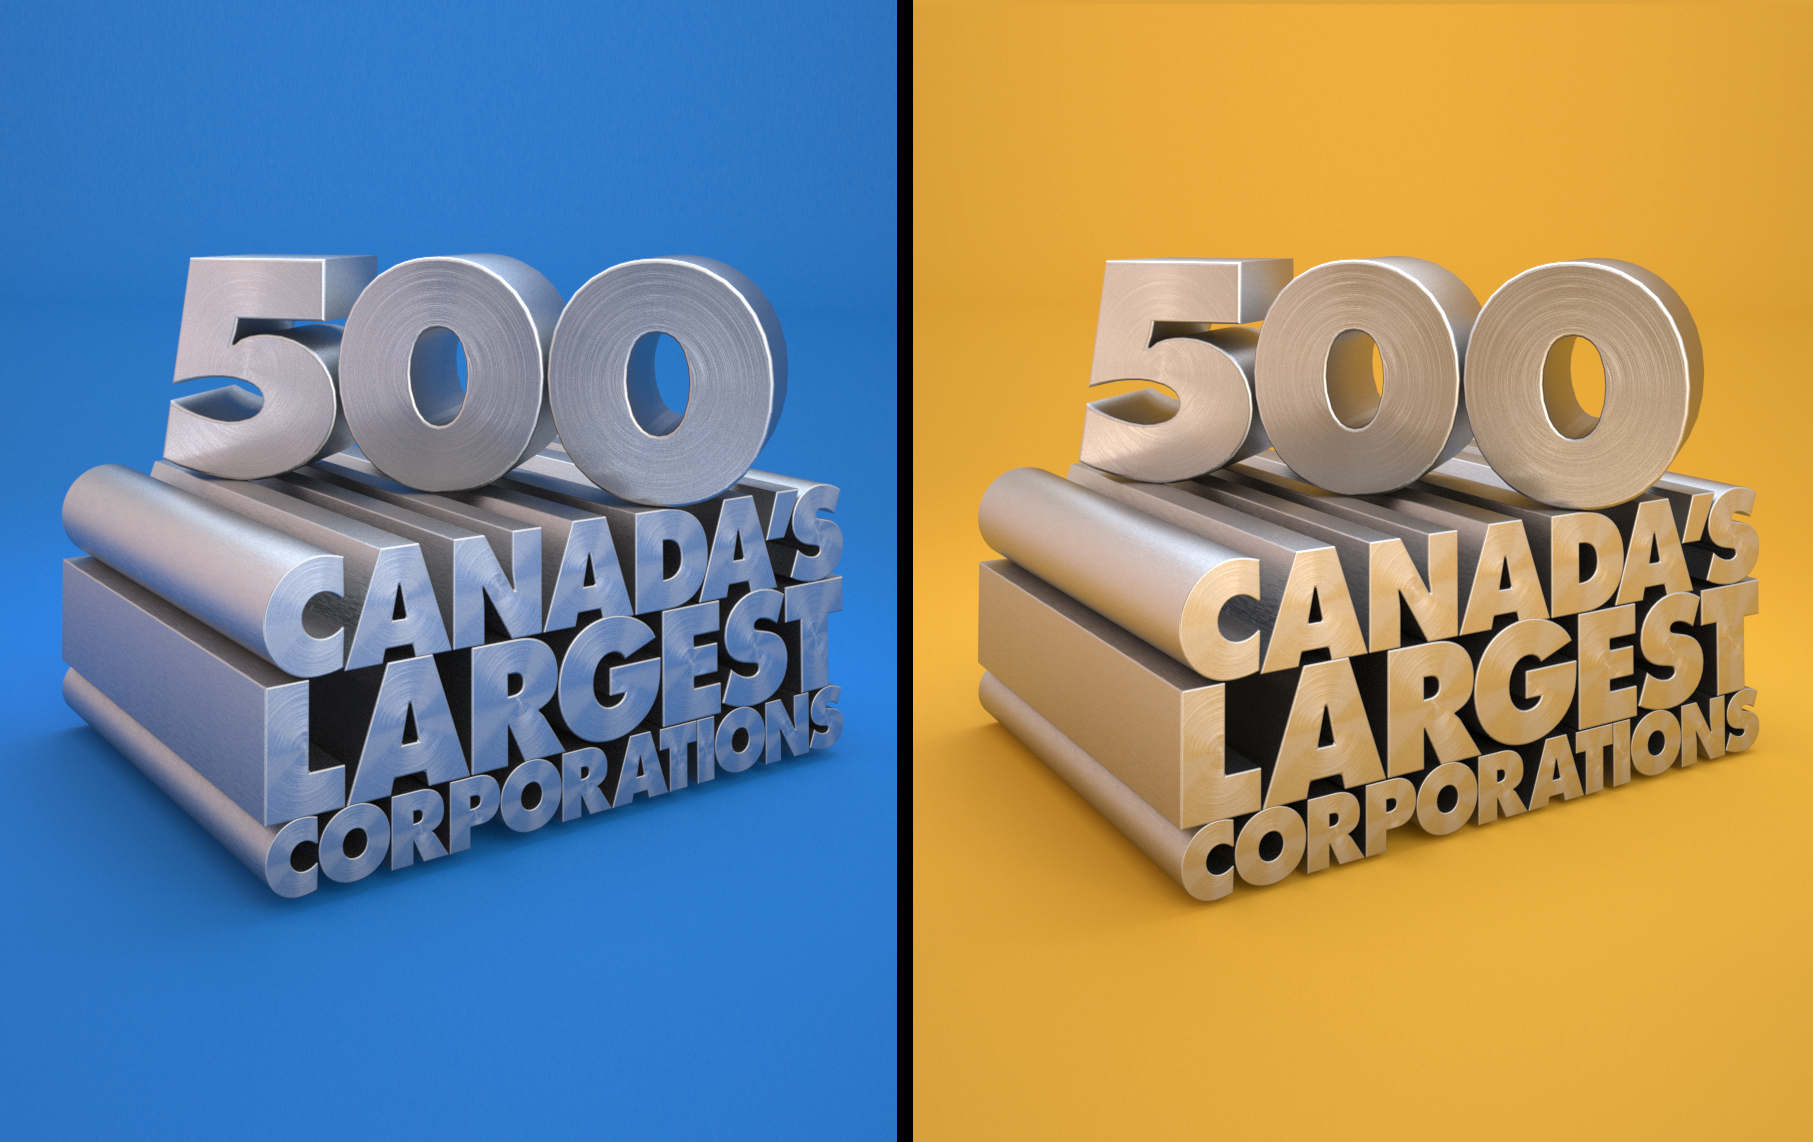 Canada's Largest Corporations